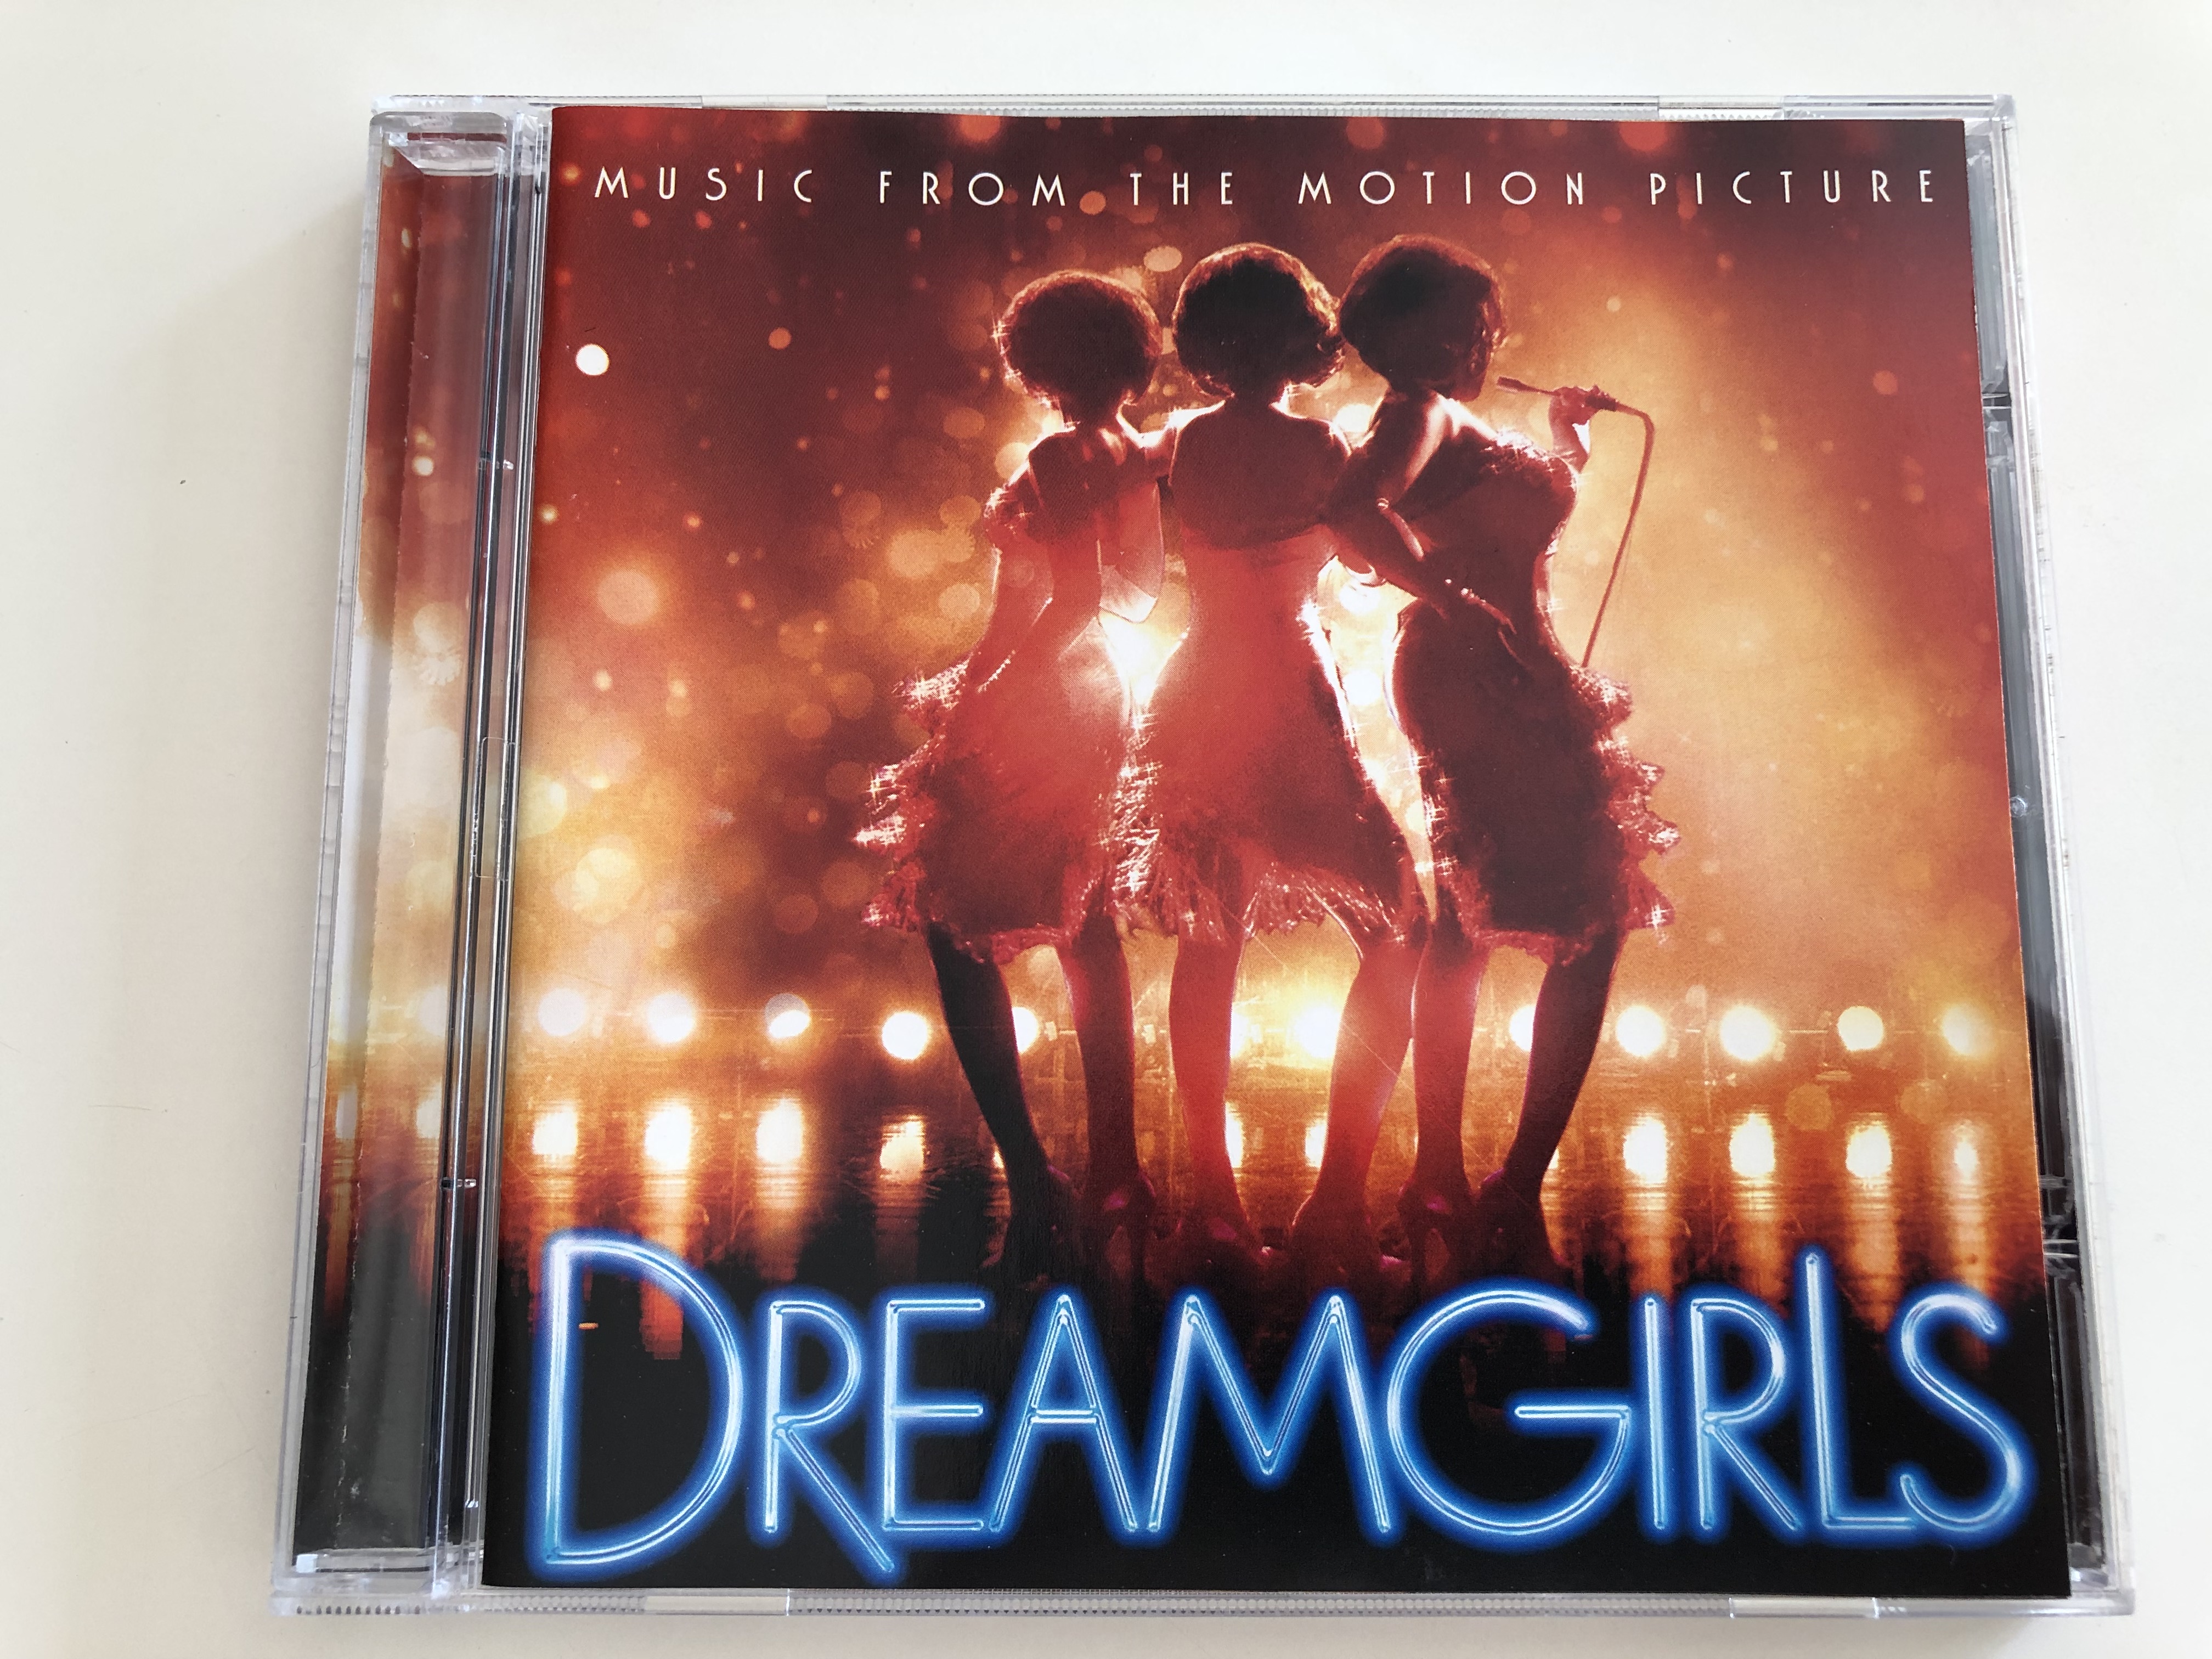 dream-girls-music-from-the-motion-picture-move-love-you-i-do-family-hard-to-say-goodbye-audio-cd-2006-sony-bmg-1-.jpg